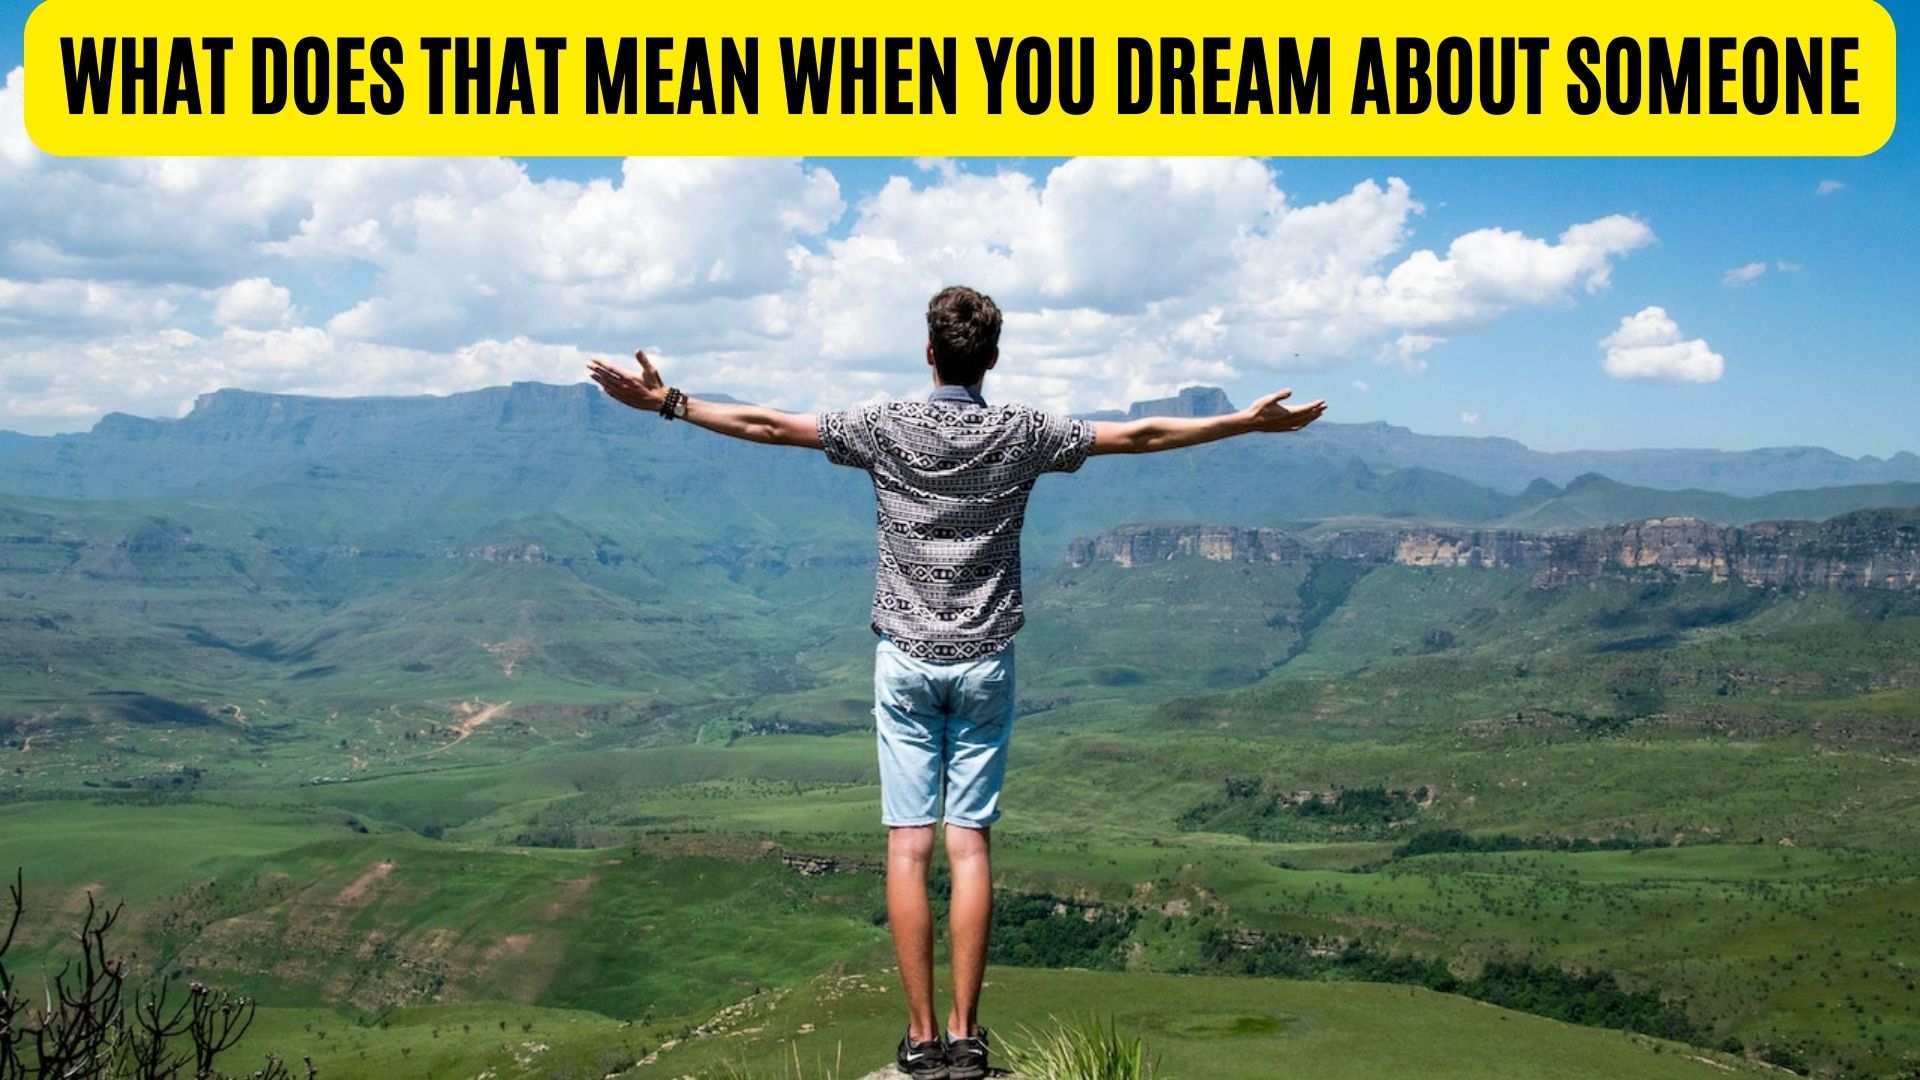 What Does That Mean When You Dream About Someone?